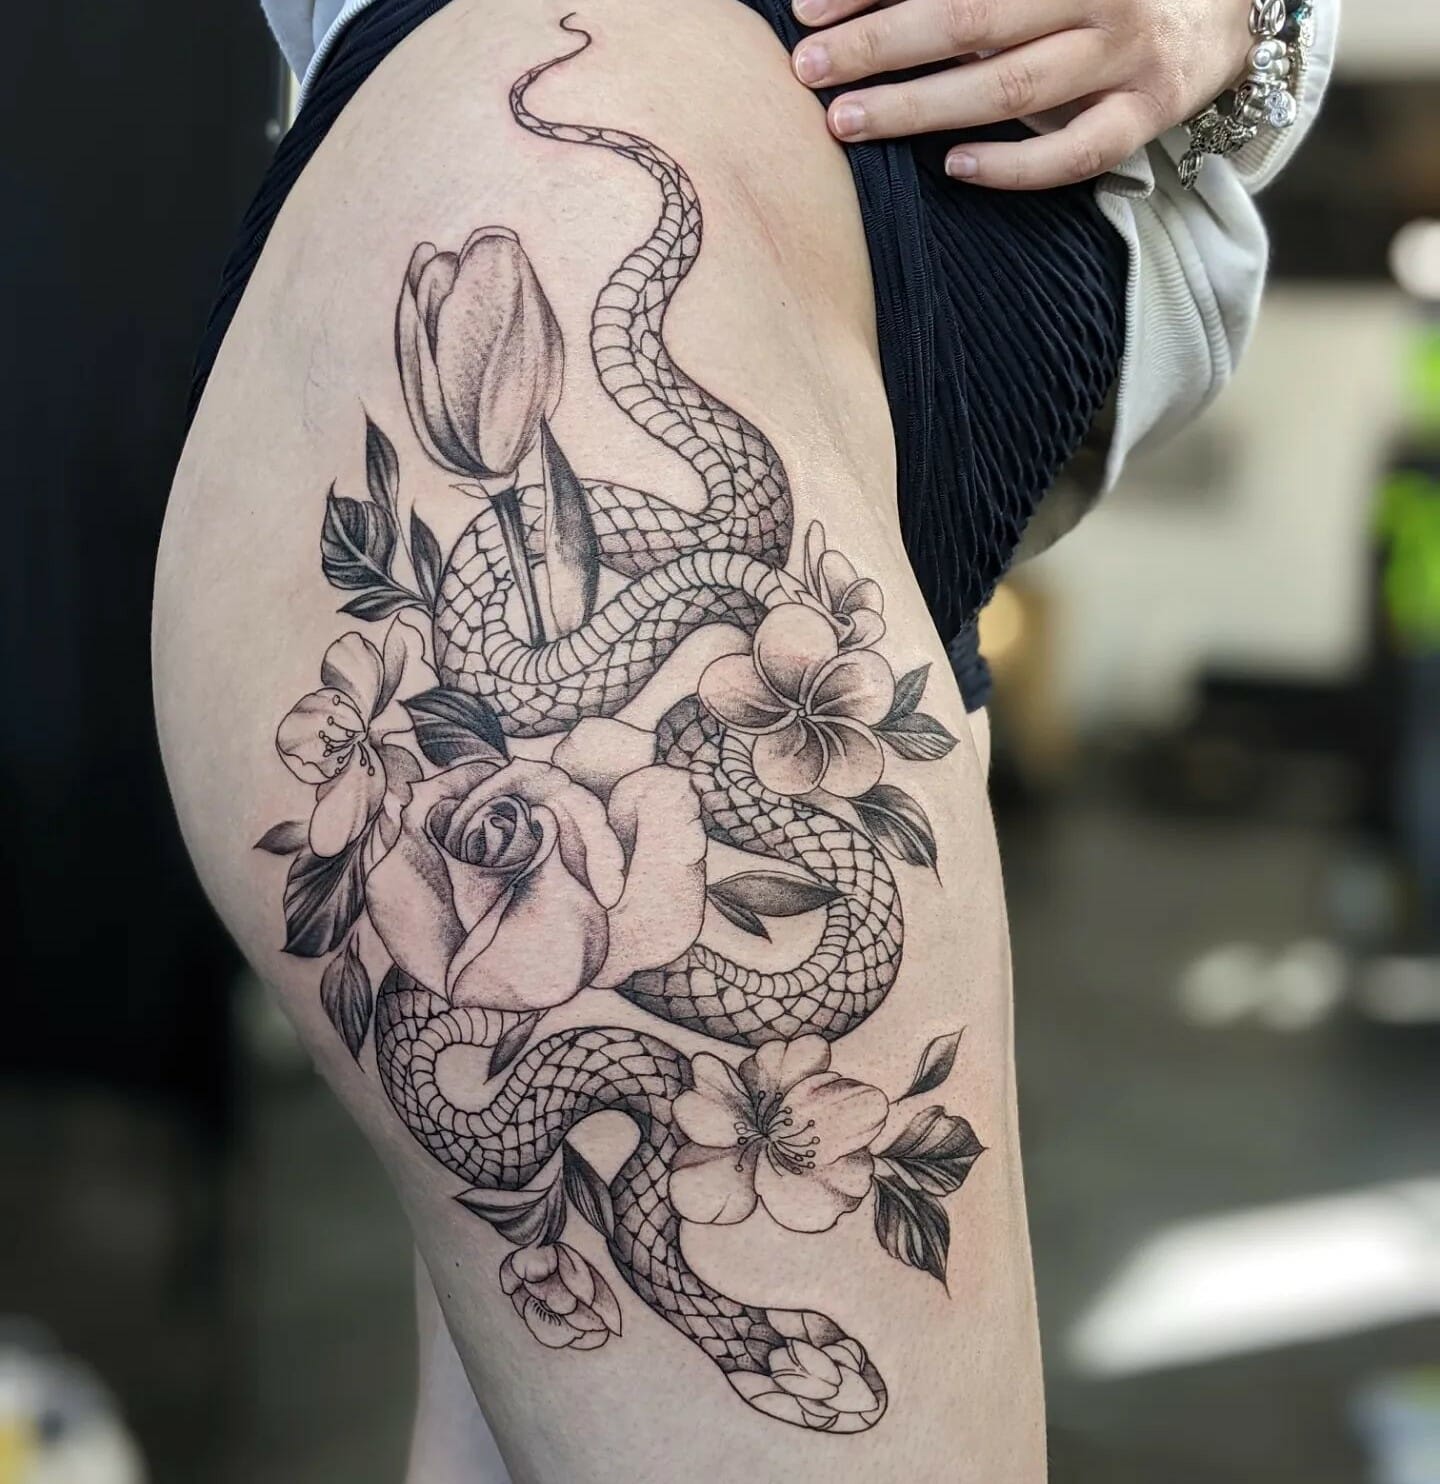 The Tattoo station  Snake with flowers thigh piece from Saturday by  Gabriela   Facebook